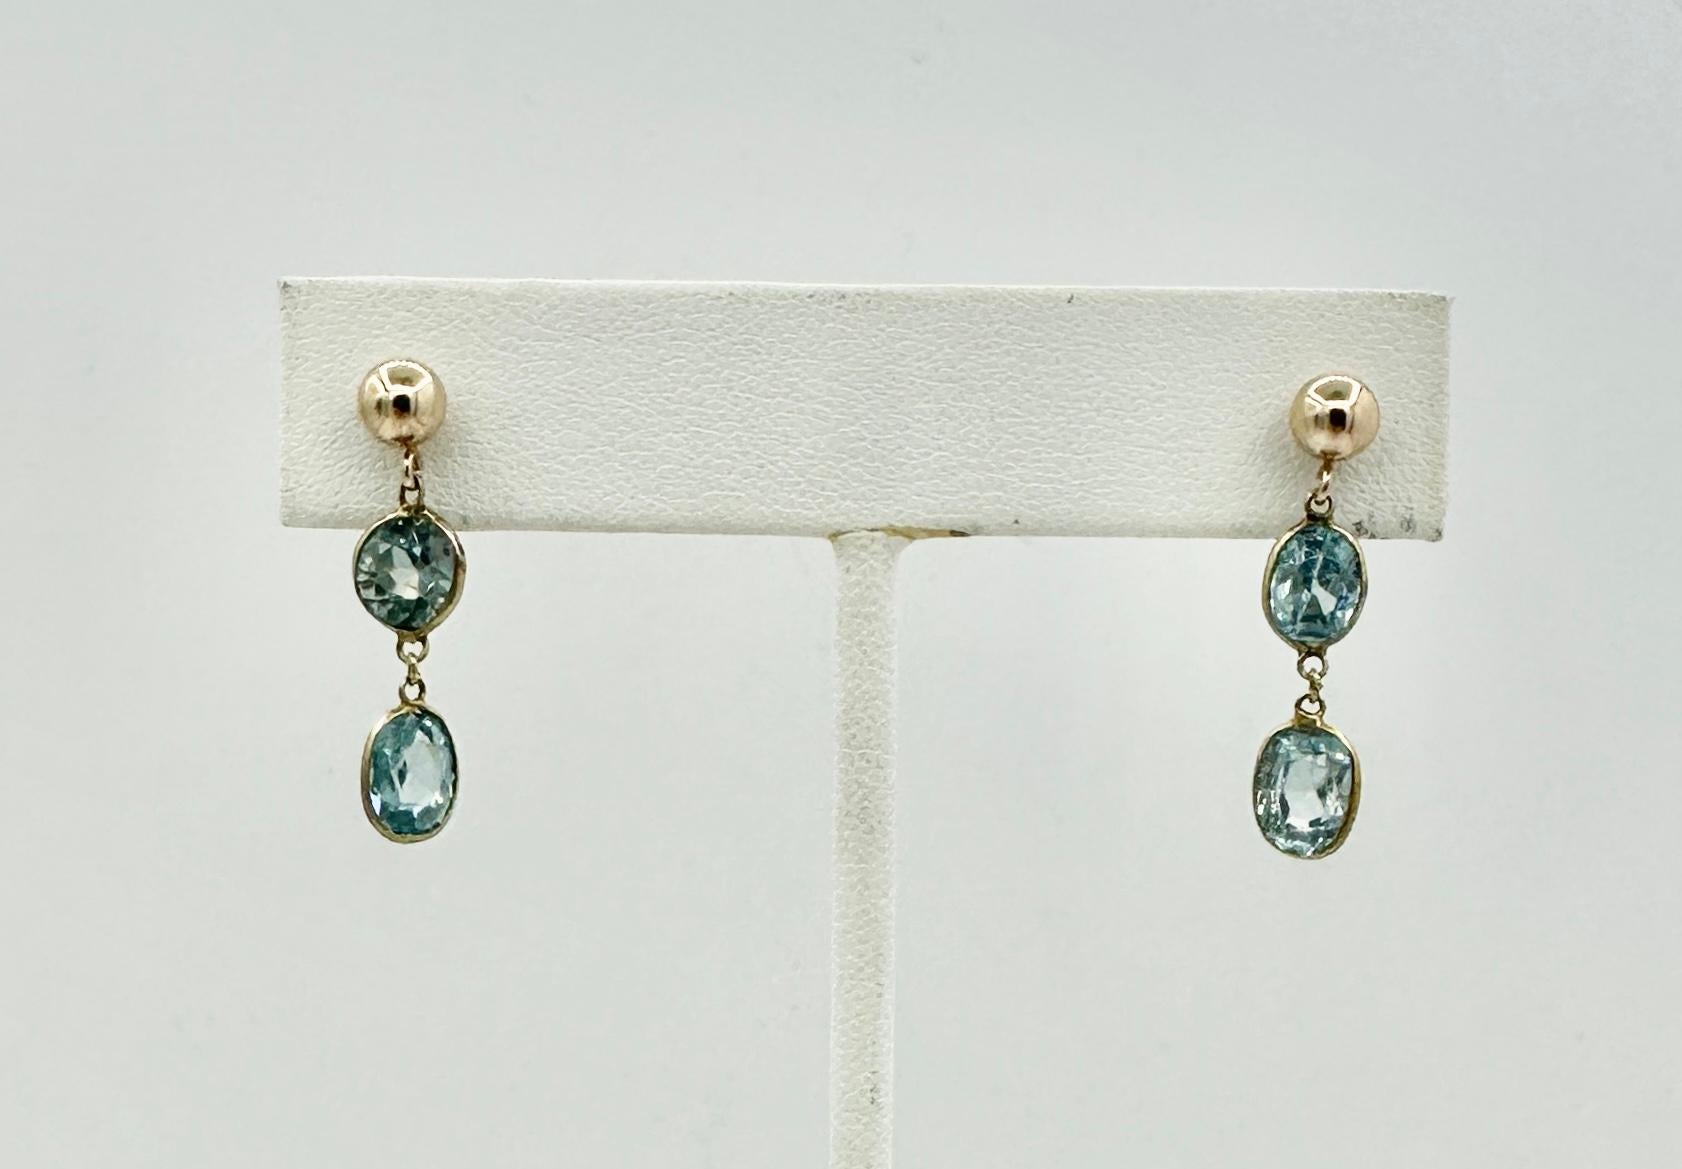 This is a stunning pair of antique Retro Zircon Earrings with gorgeous faceted natural Zircon gems of great beauty in 10 Karat Gold. 
The antique Retro drop earrings are absolutely wonderful and it is so rare to find earrings with gorgeous Zircon